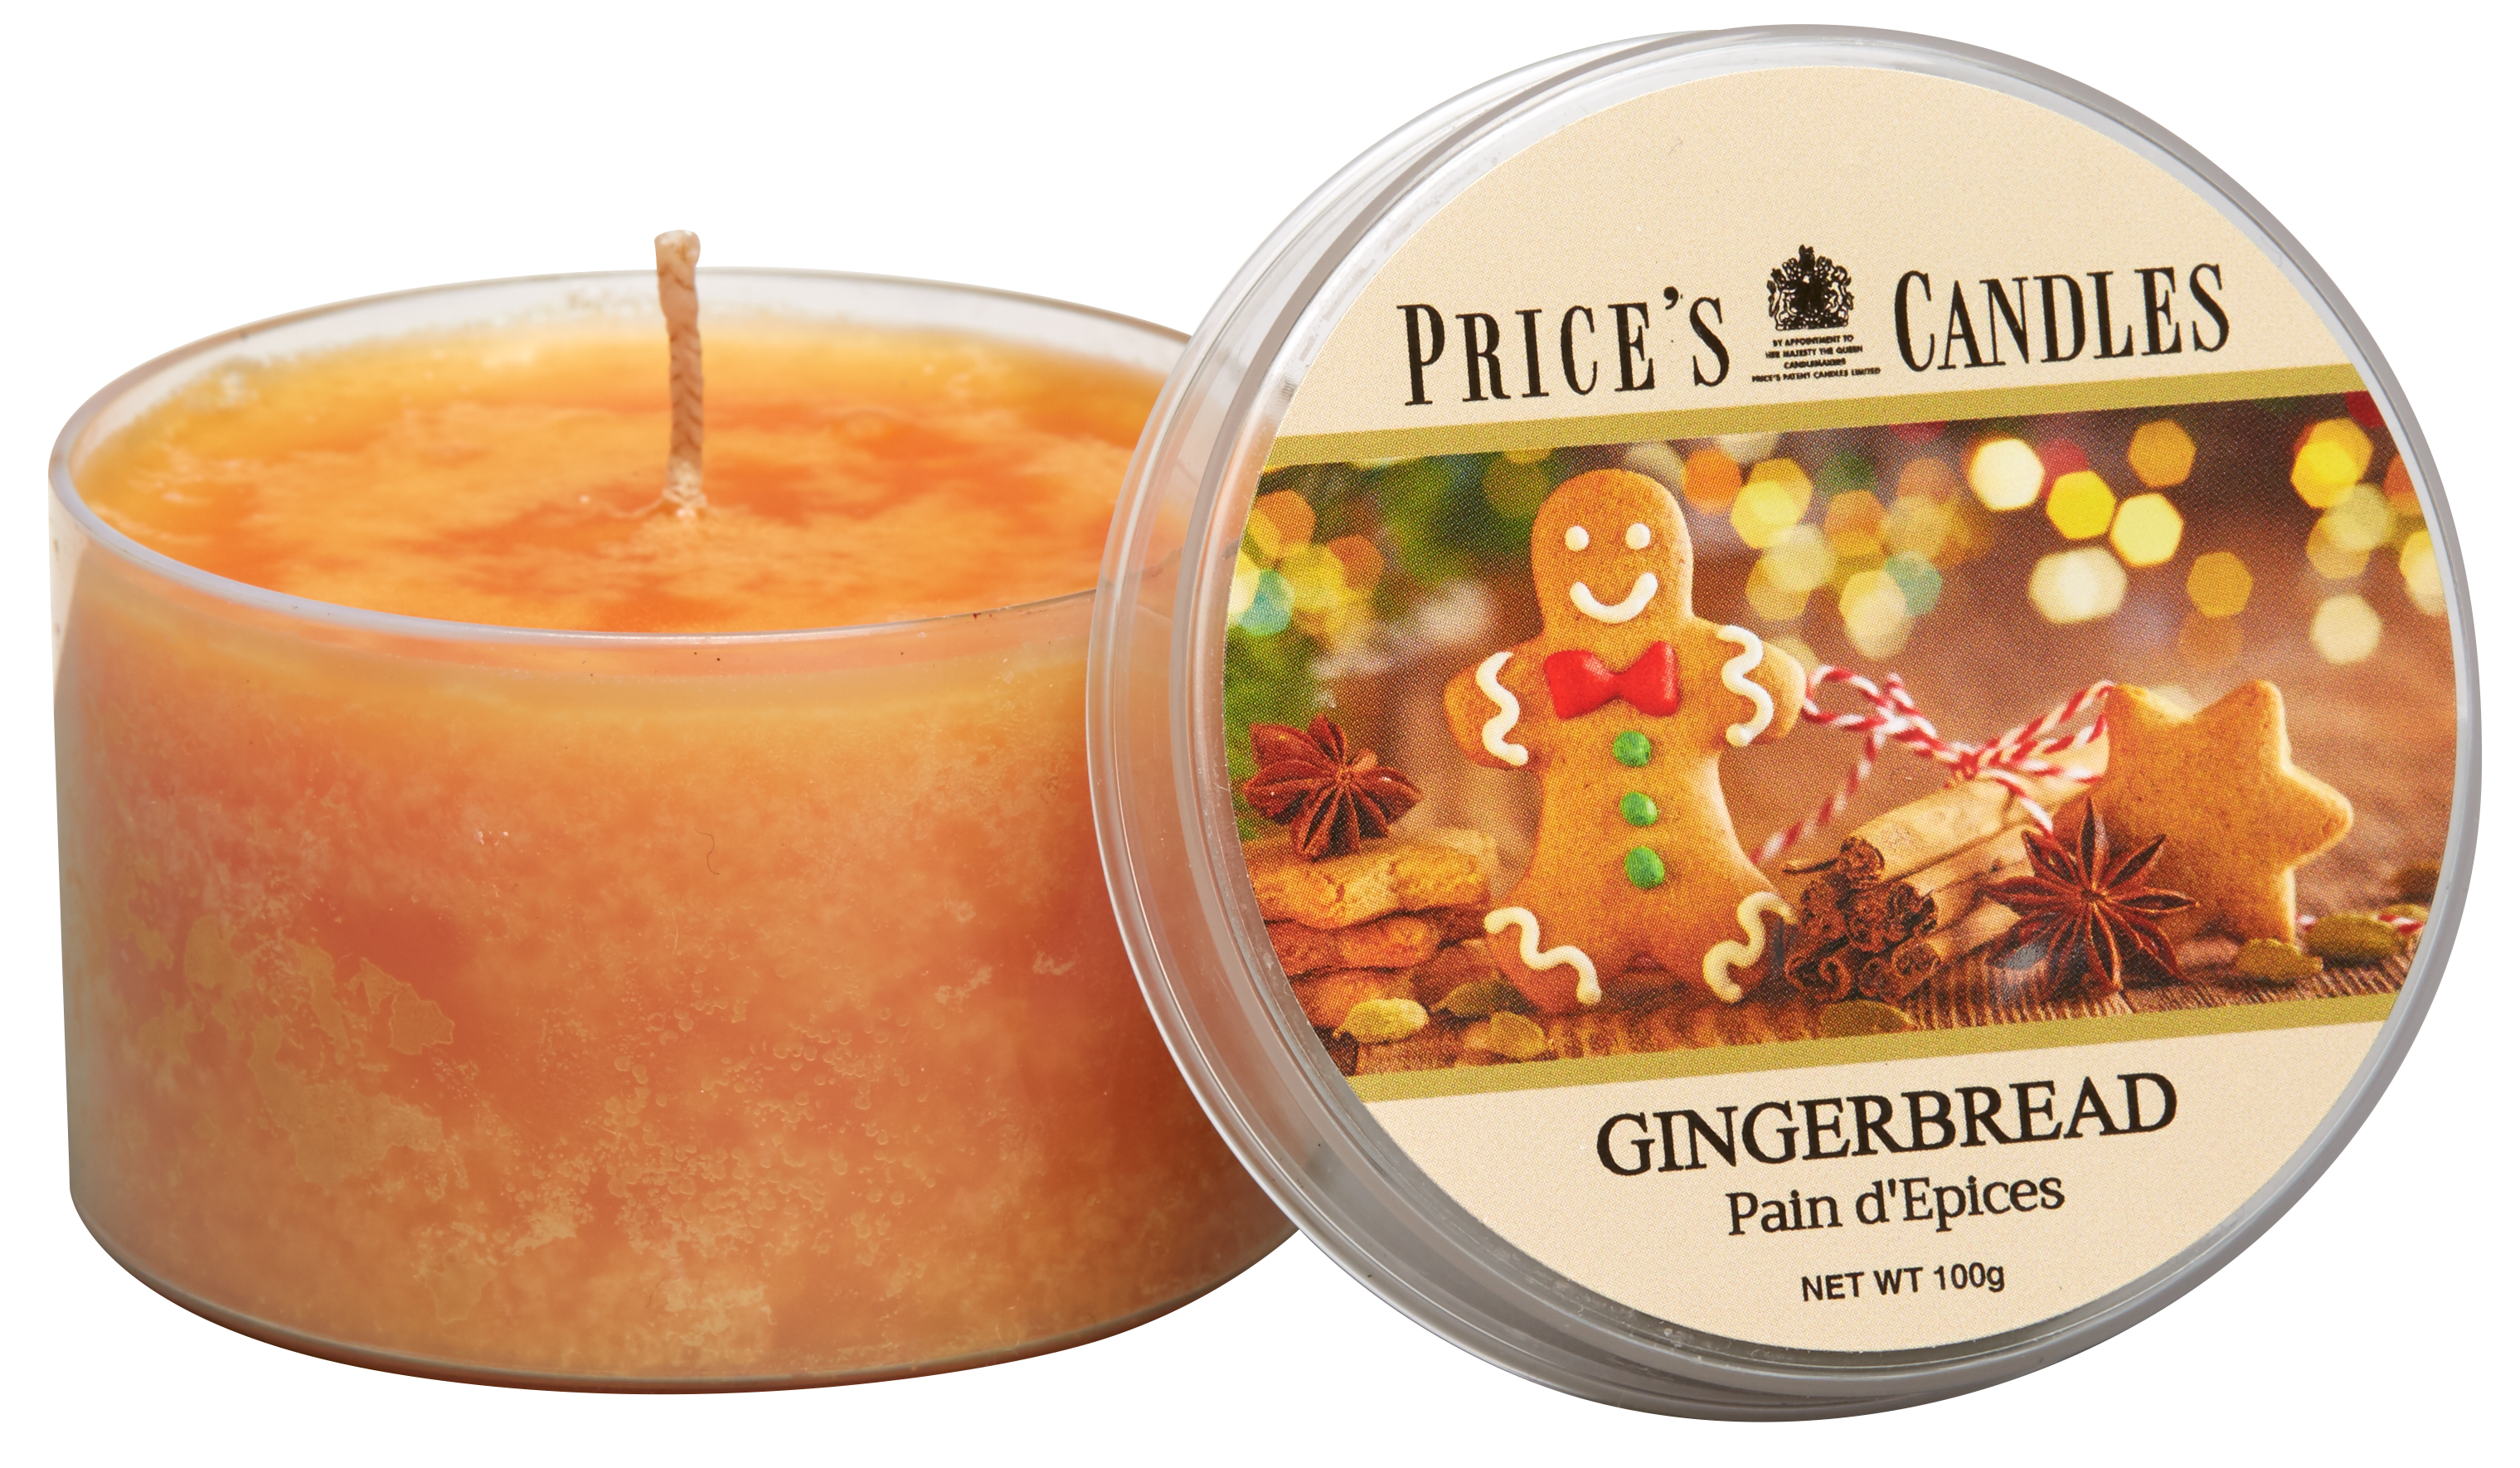 Prices Candle "Gingerbread" 100g      